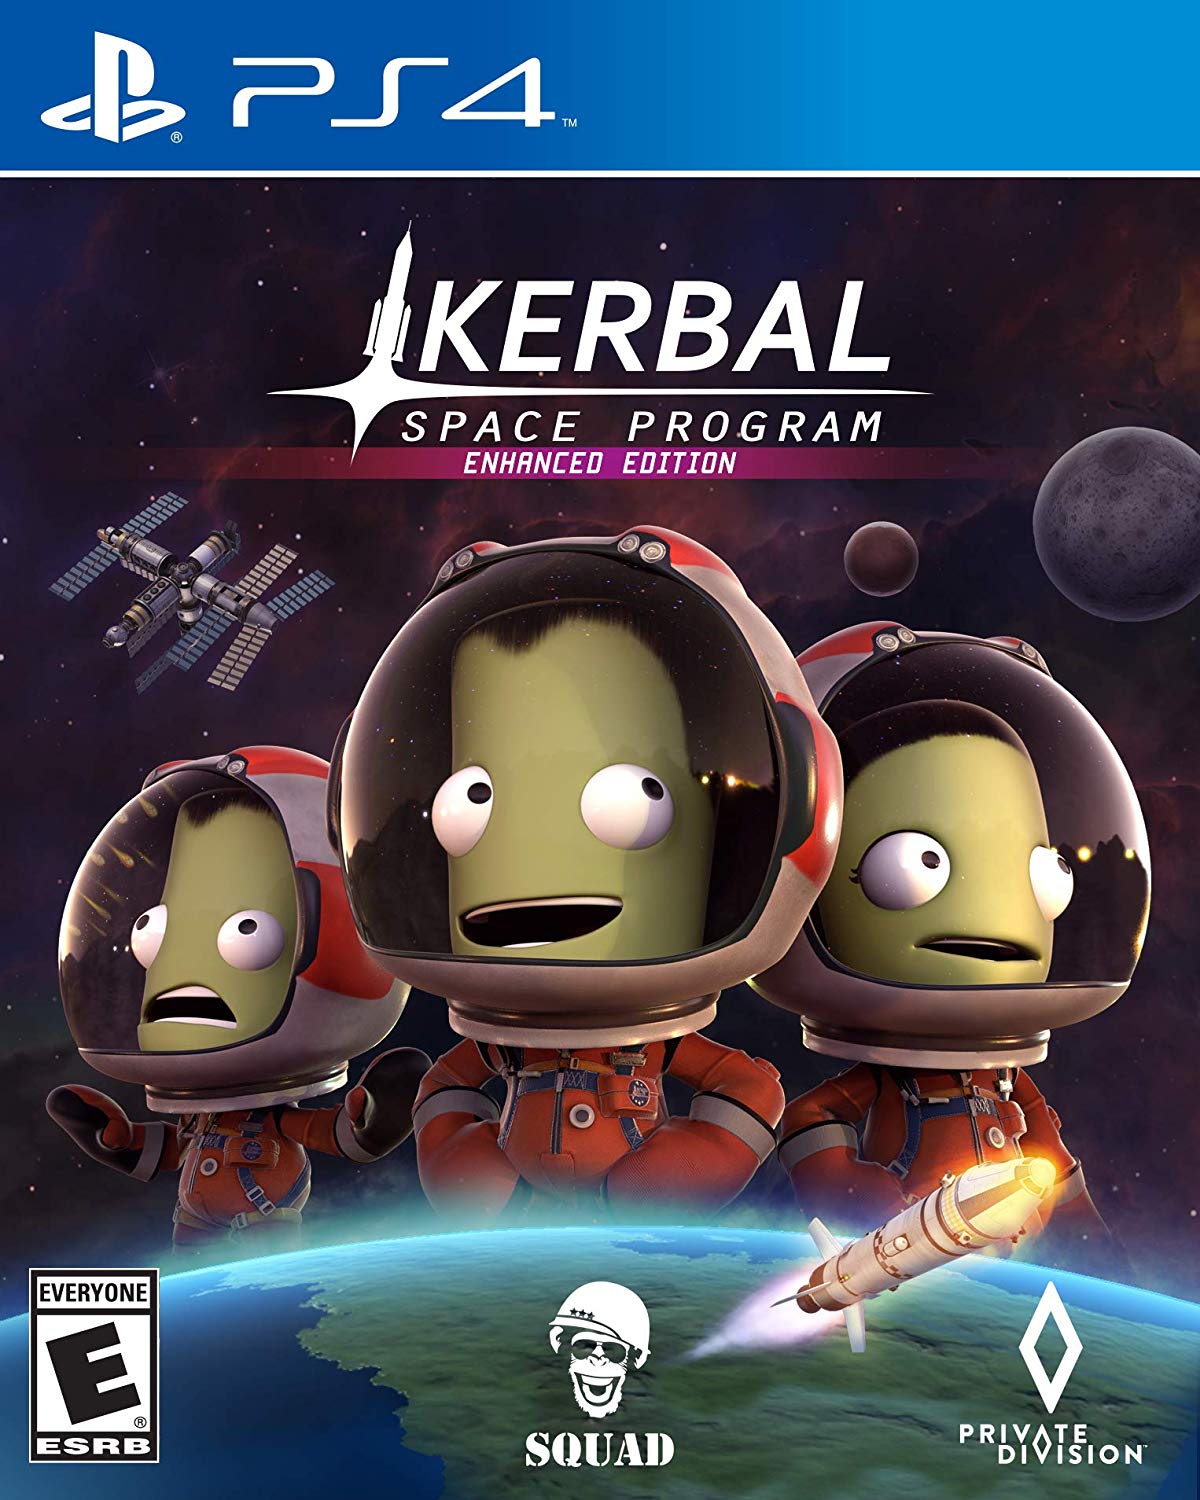 Kerbal space program download for android windows 10